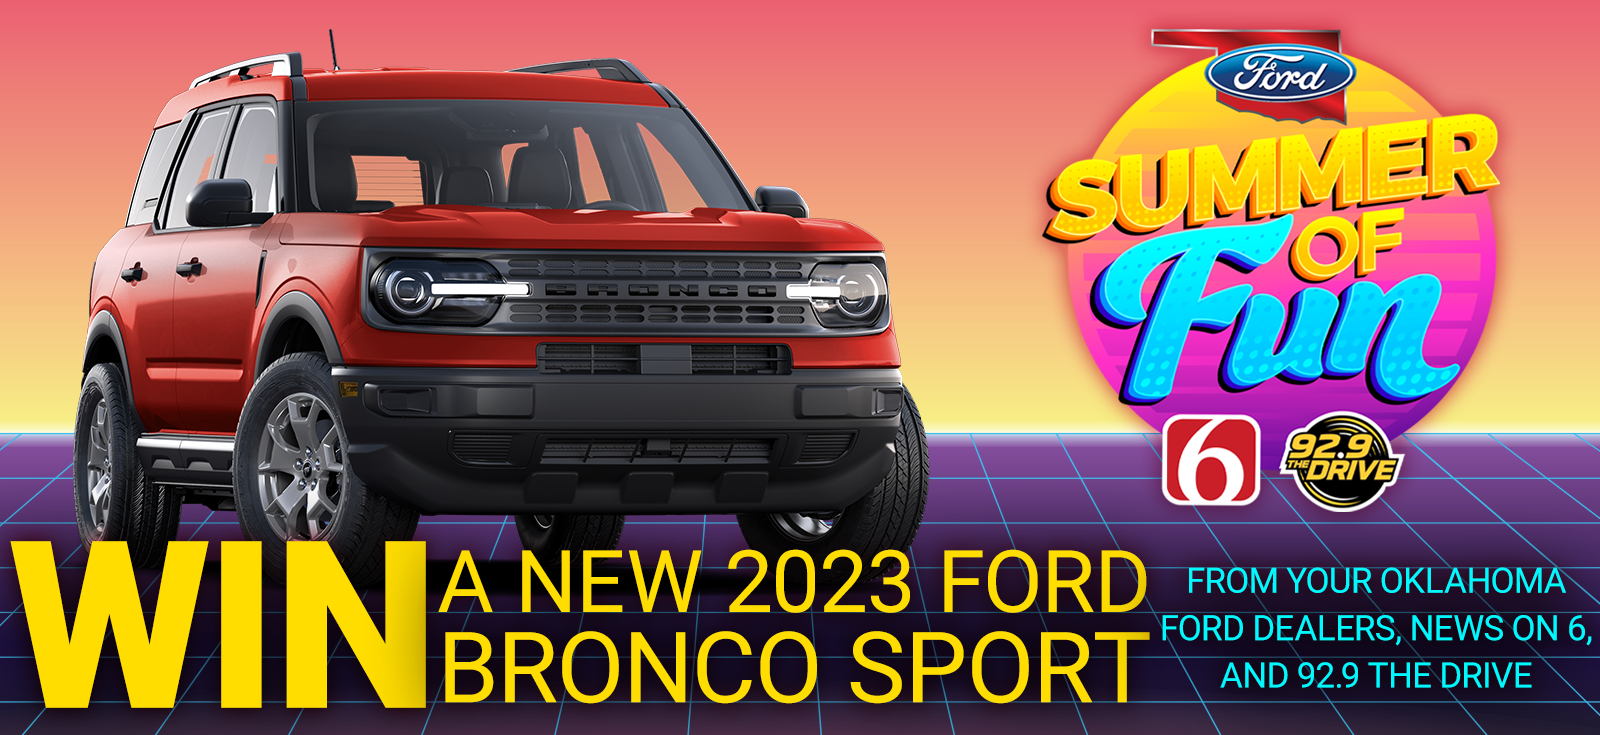 Win a Ford Bronco from News On 6 and The Drive